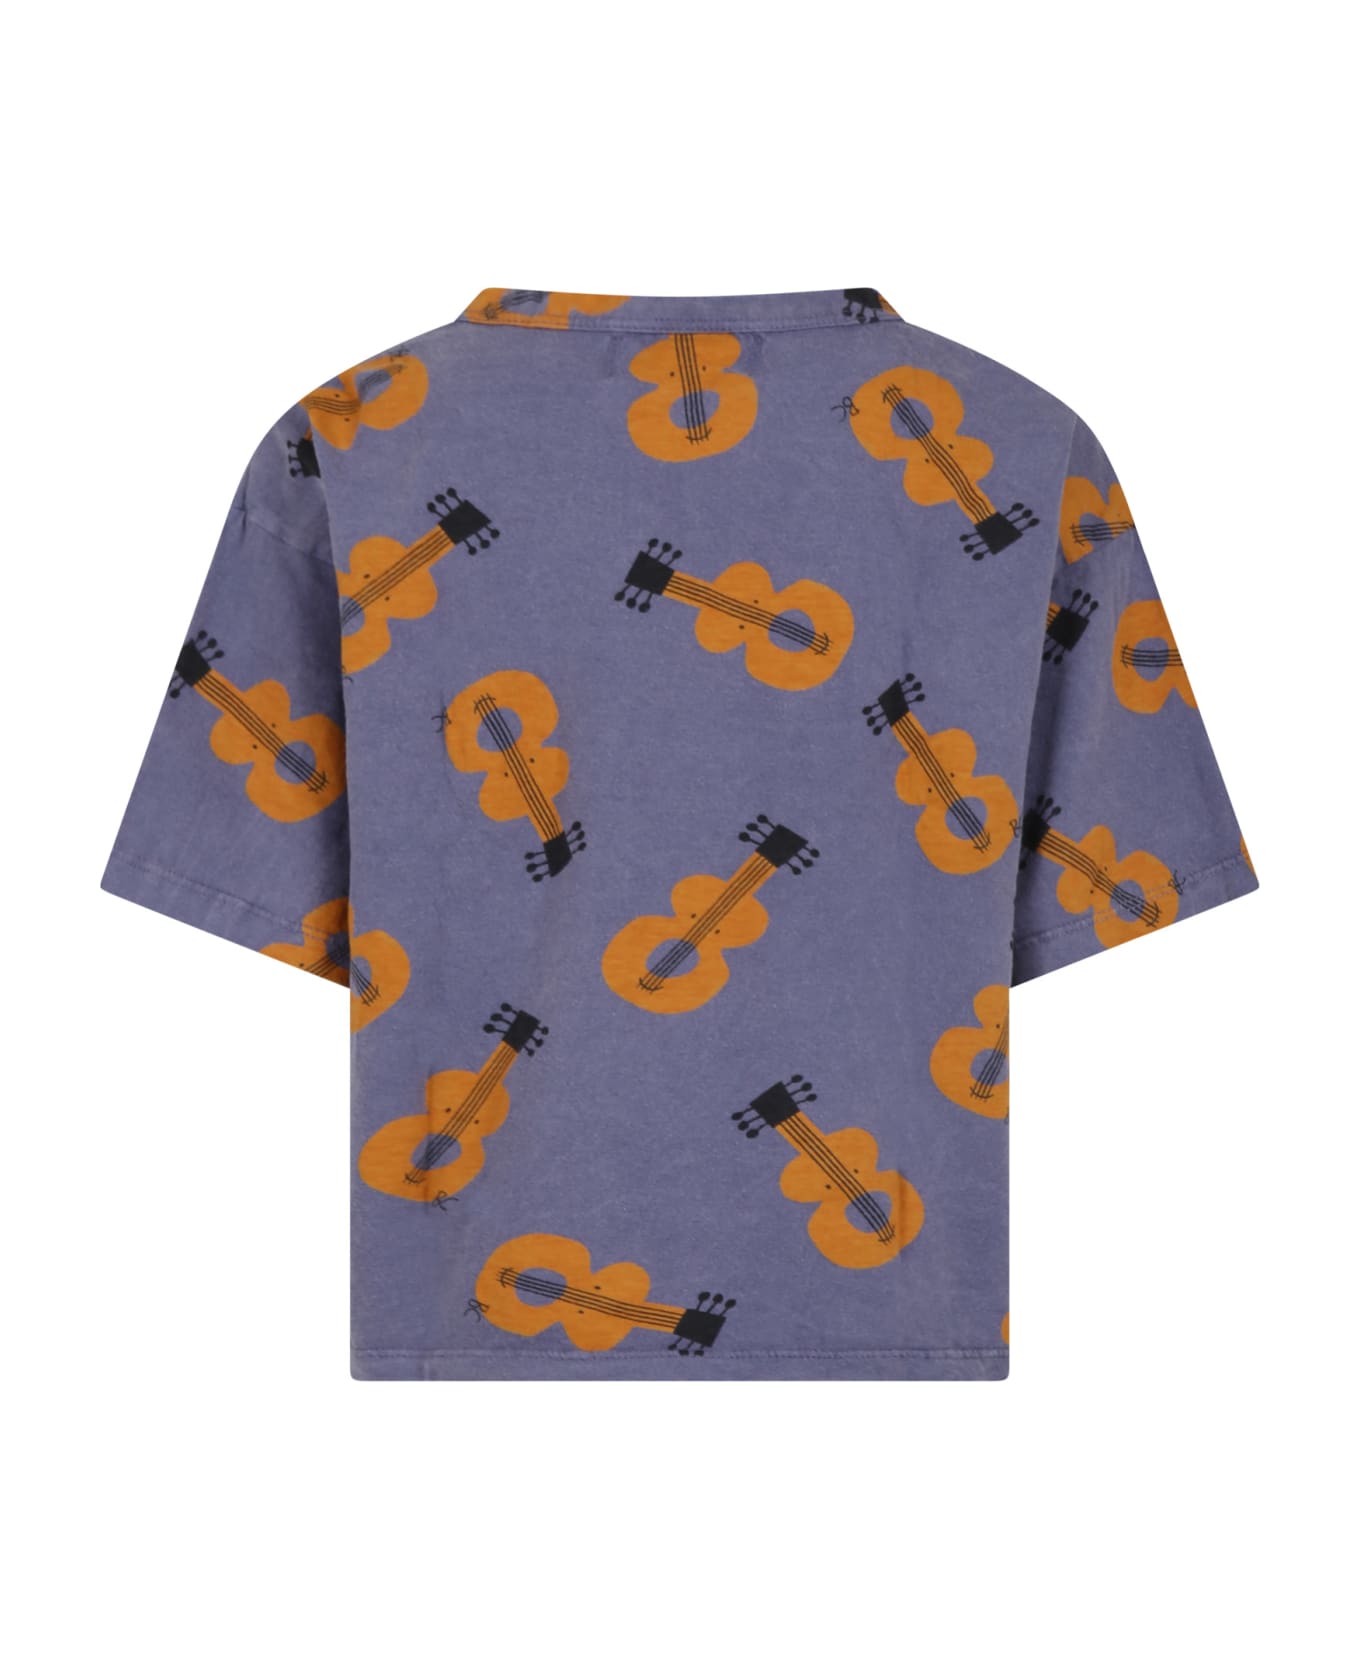 Bobo Choses Purple T-shirt For Kids With Guitars - Violet